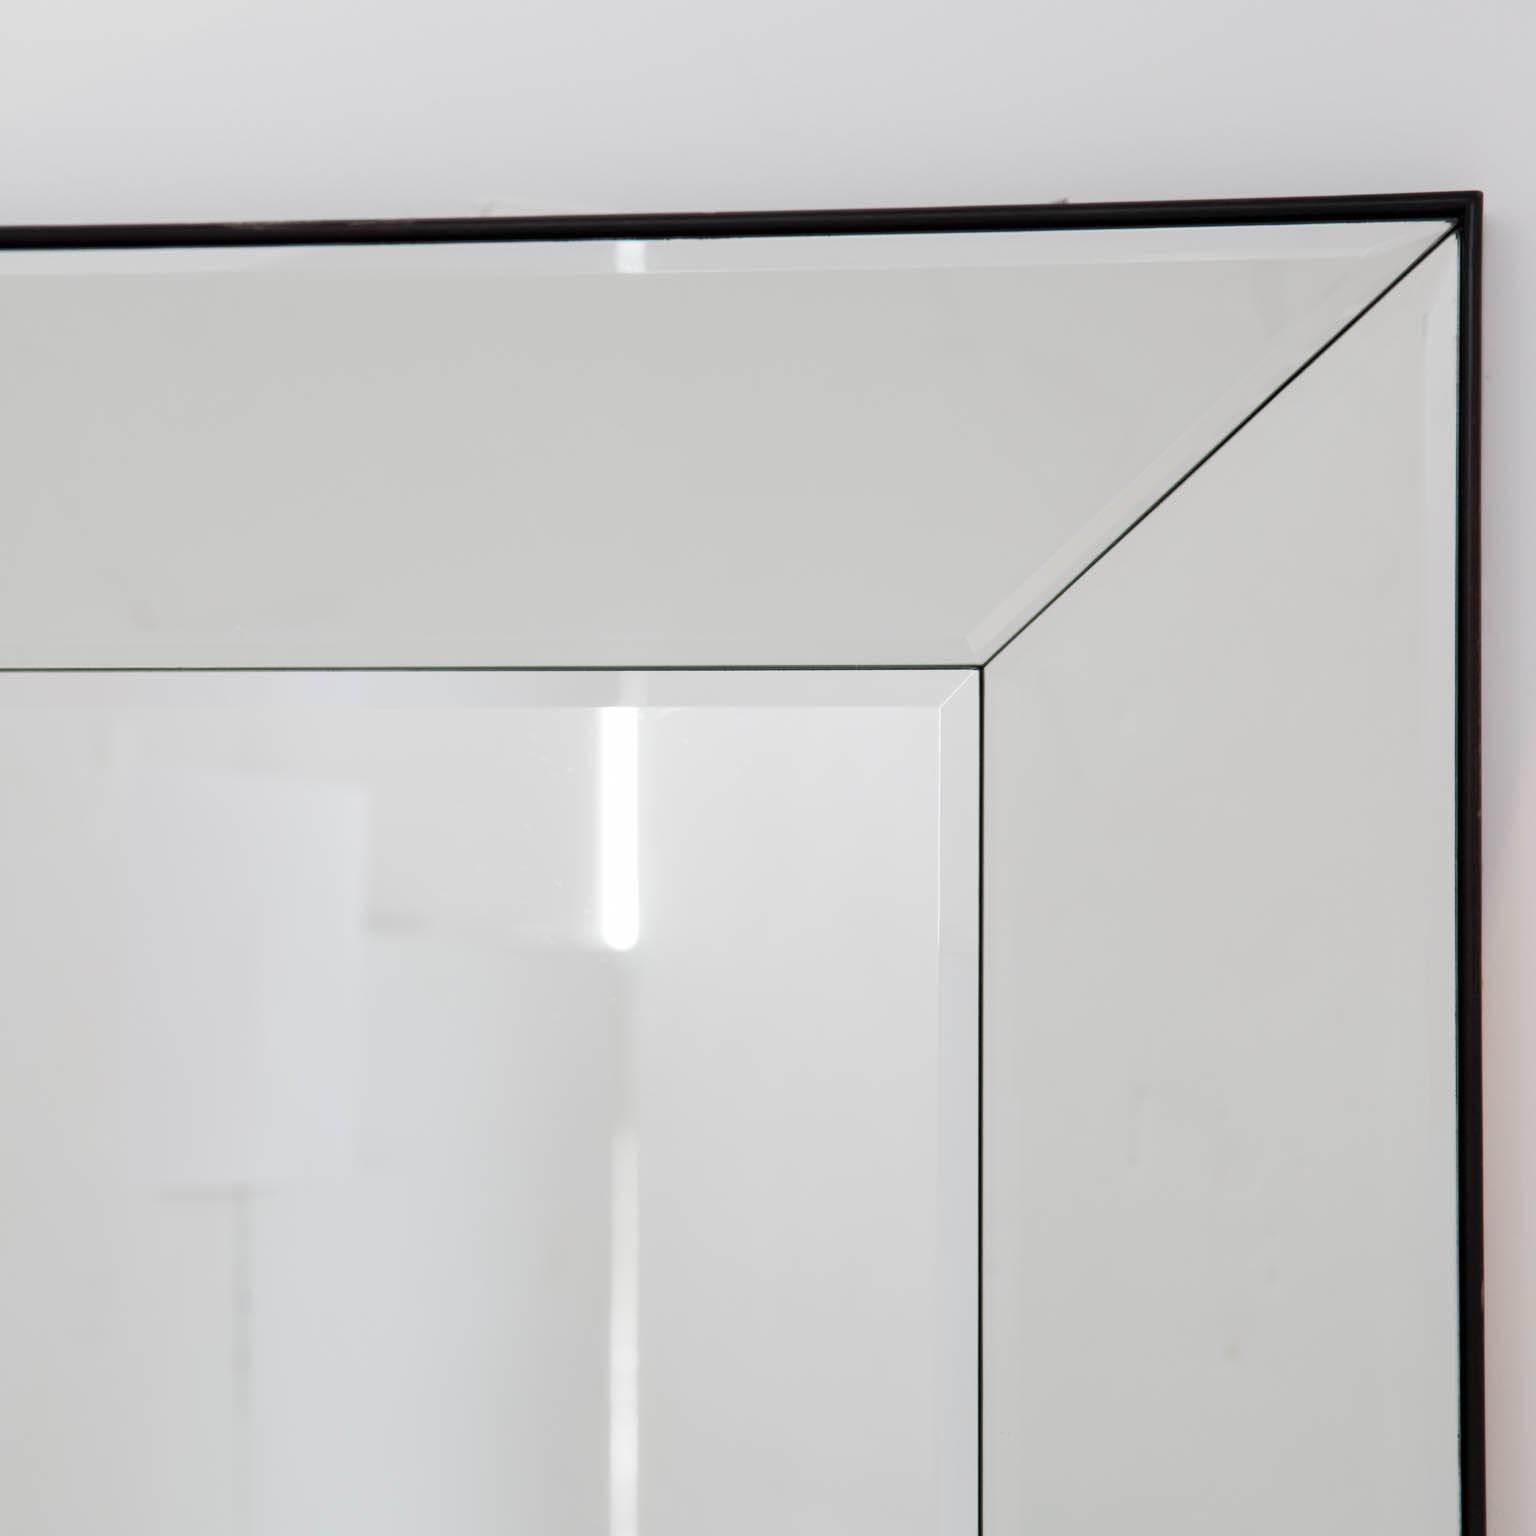 Discontinued pair of large Williams Sonoma beveled mirrors. Can be hung vertically or horizontally with included mounting brackets.